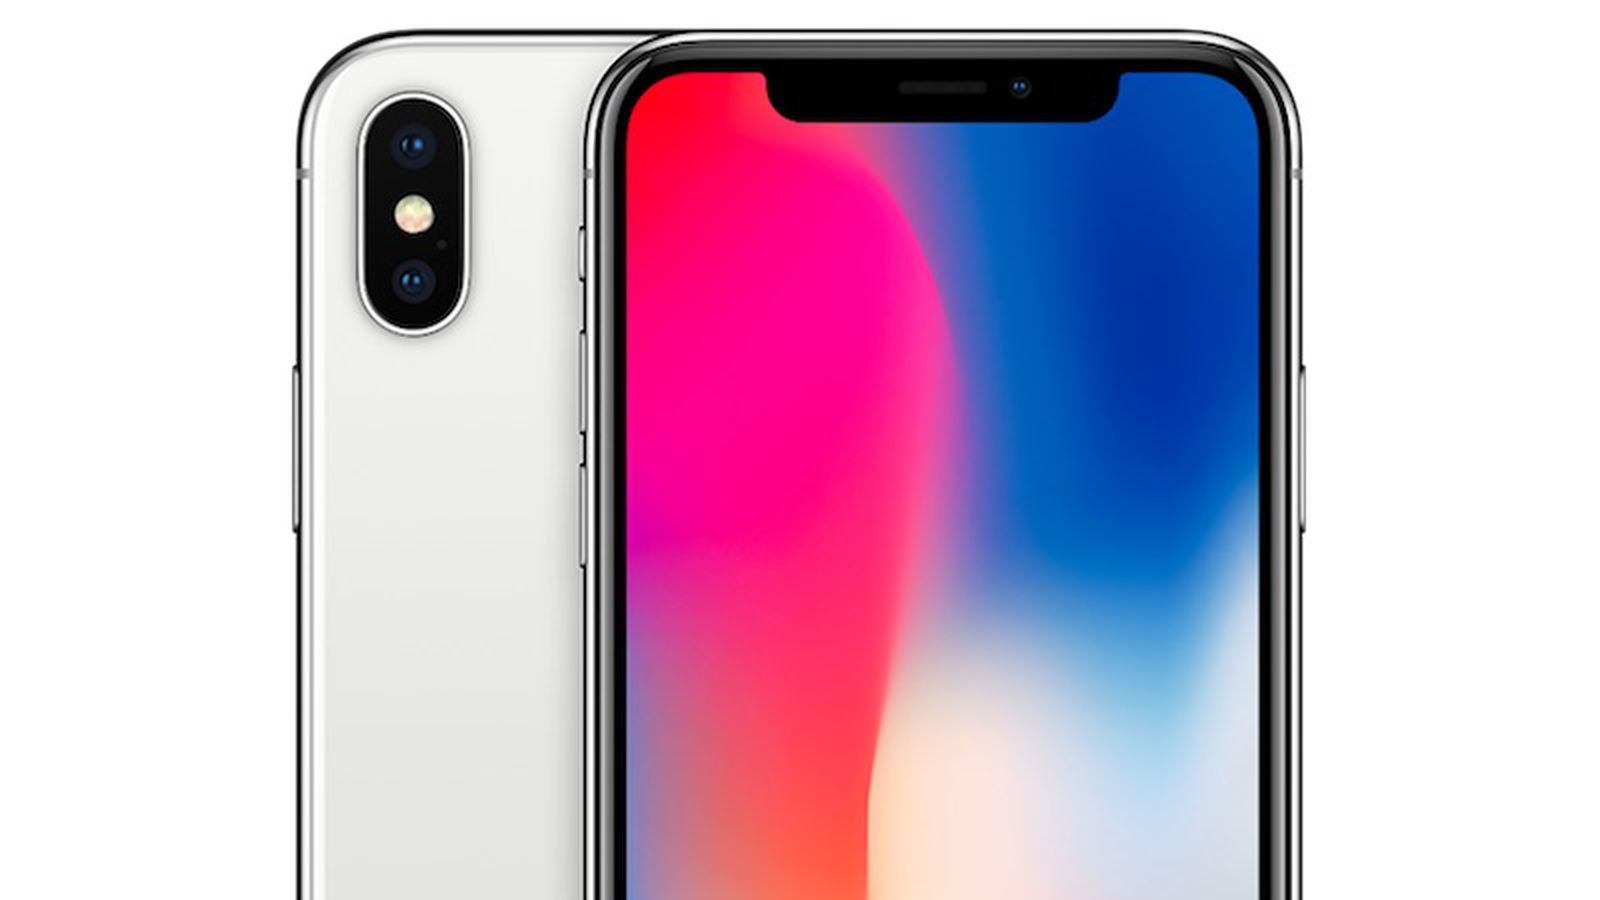 KGI: Apple to Discontinue iPhone X Rather Than Sell at Lower Price 